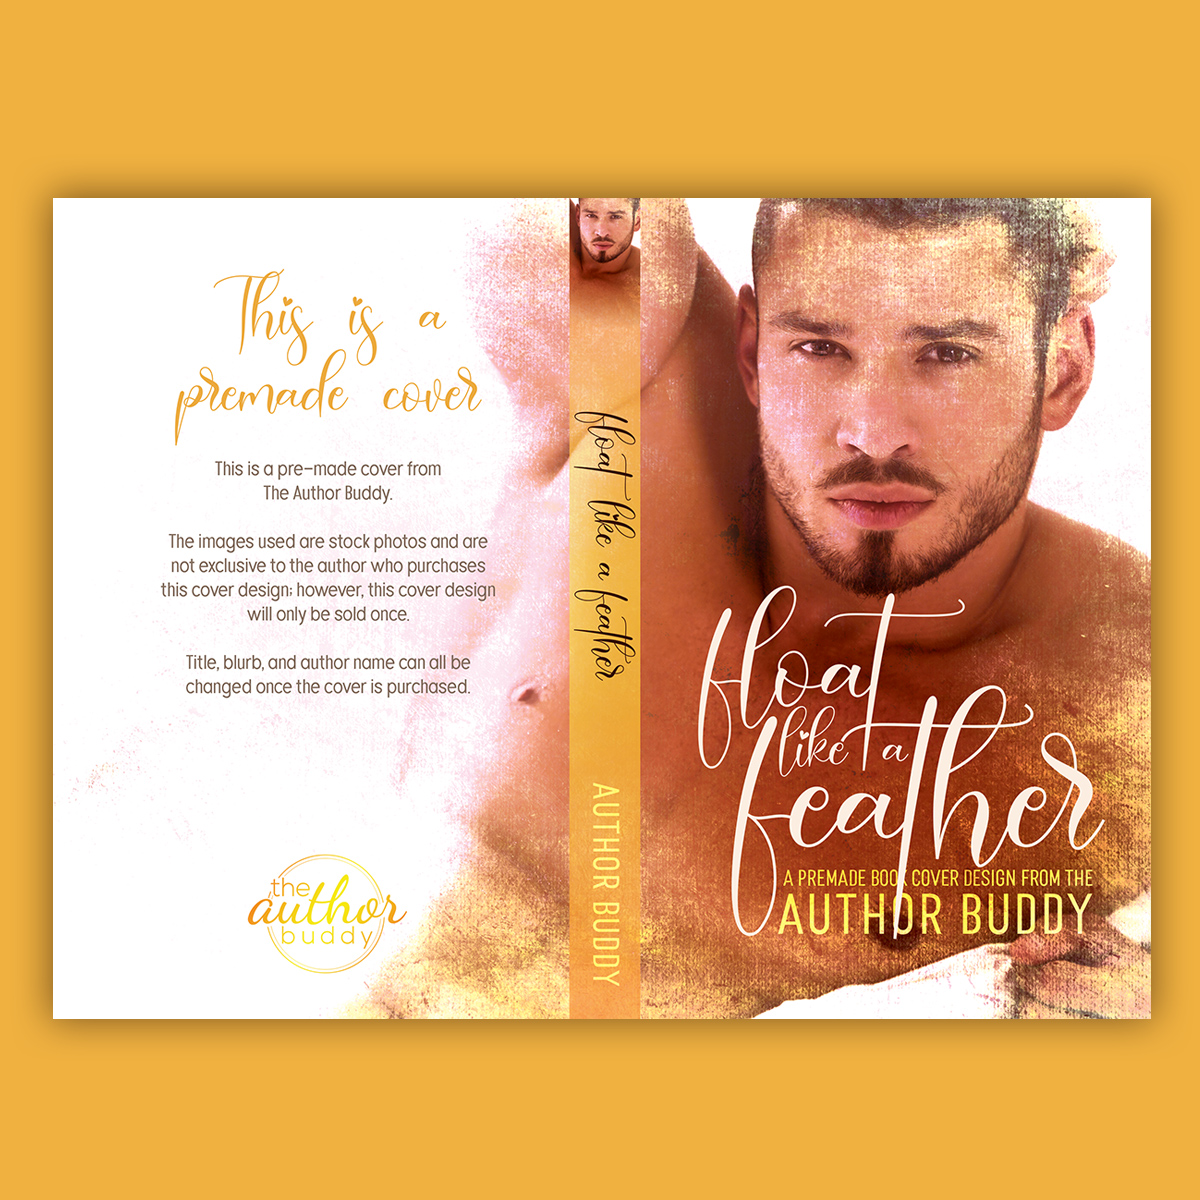 Float Like a Feather - Premade Contemporary Romance Book Cover from The Author Buddy